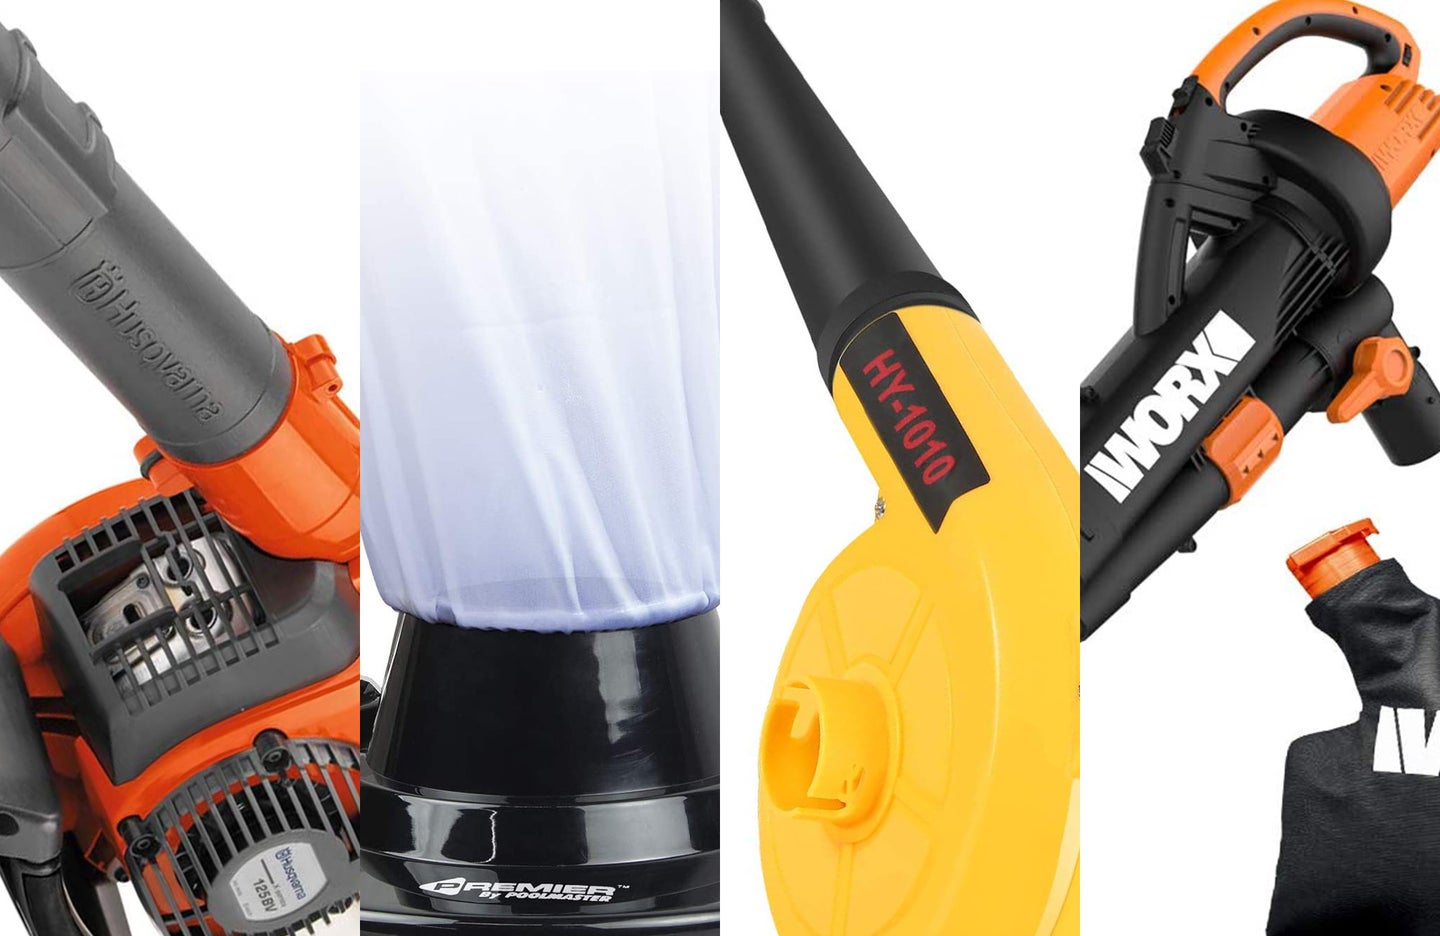 A lineup of the best leaf vacuums on a white background